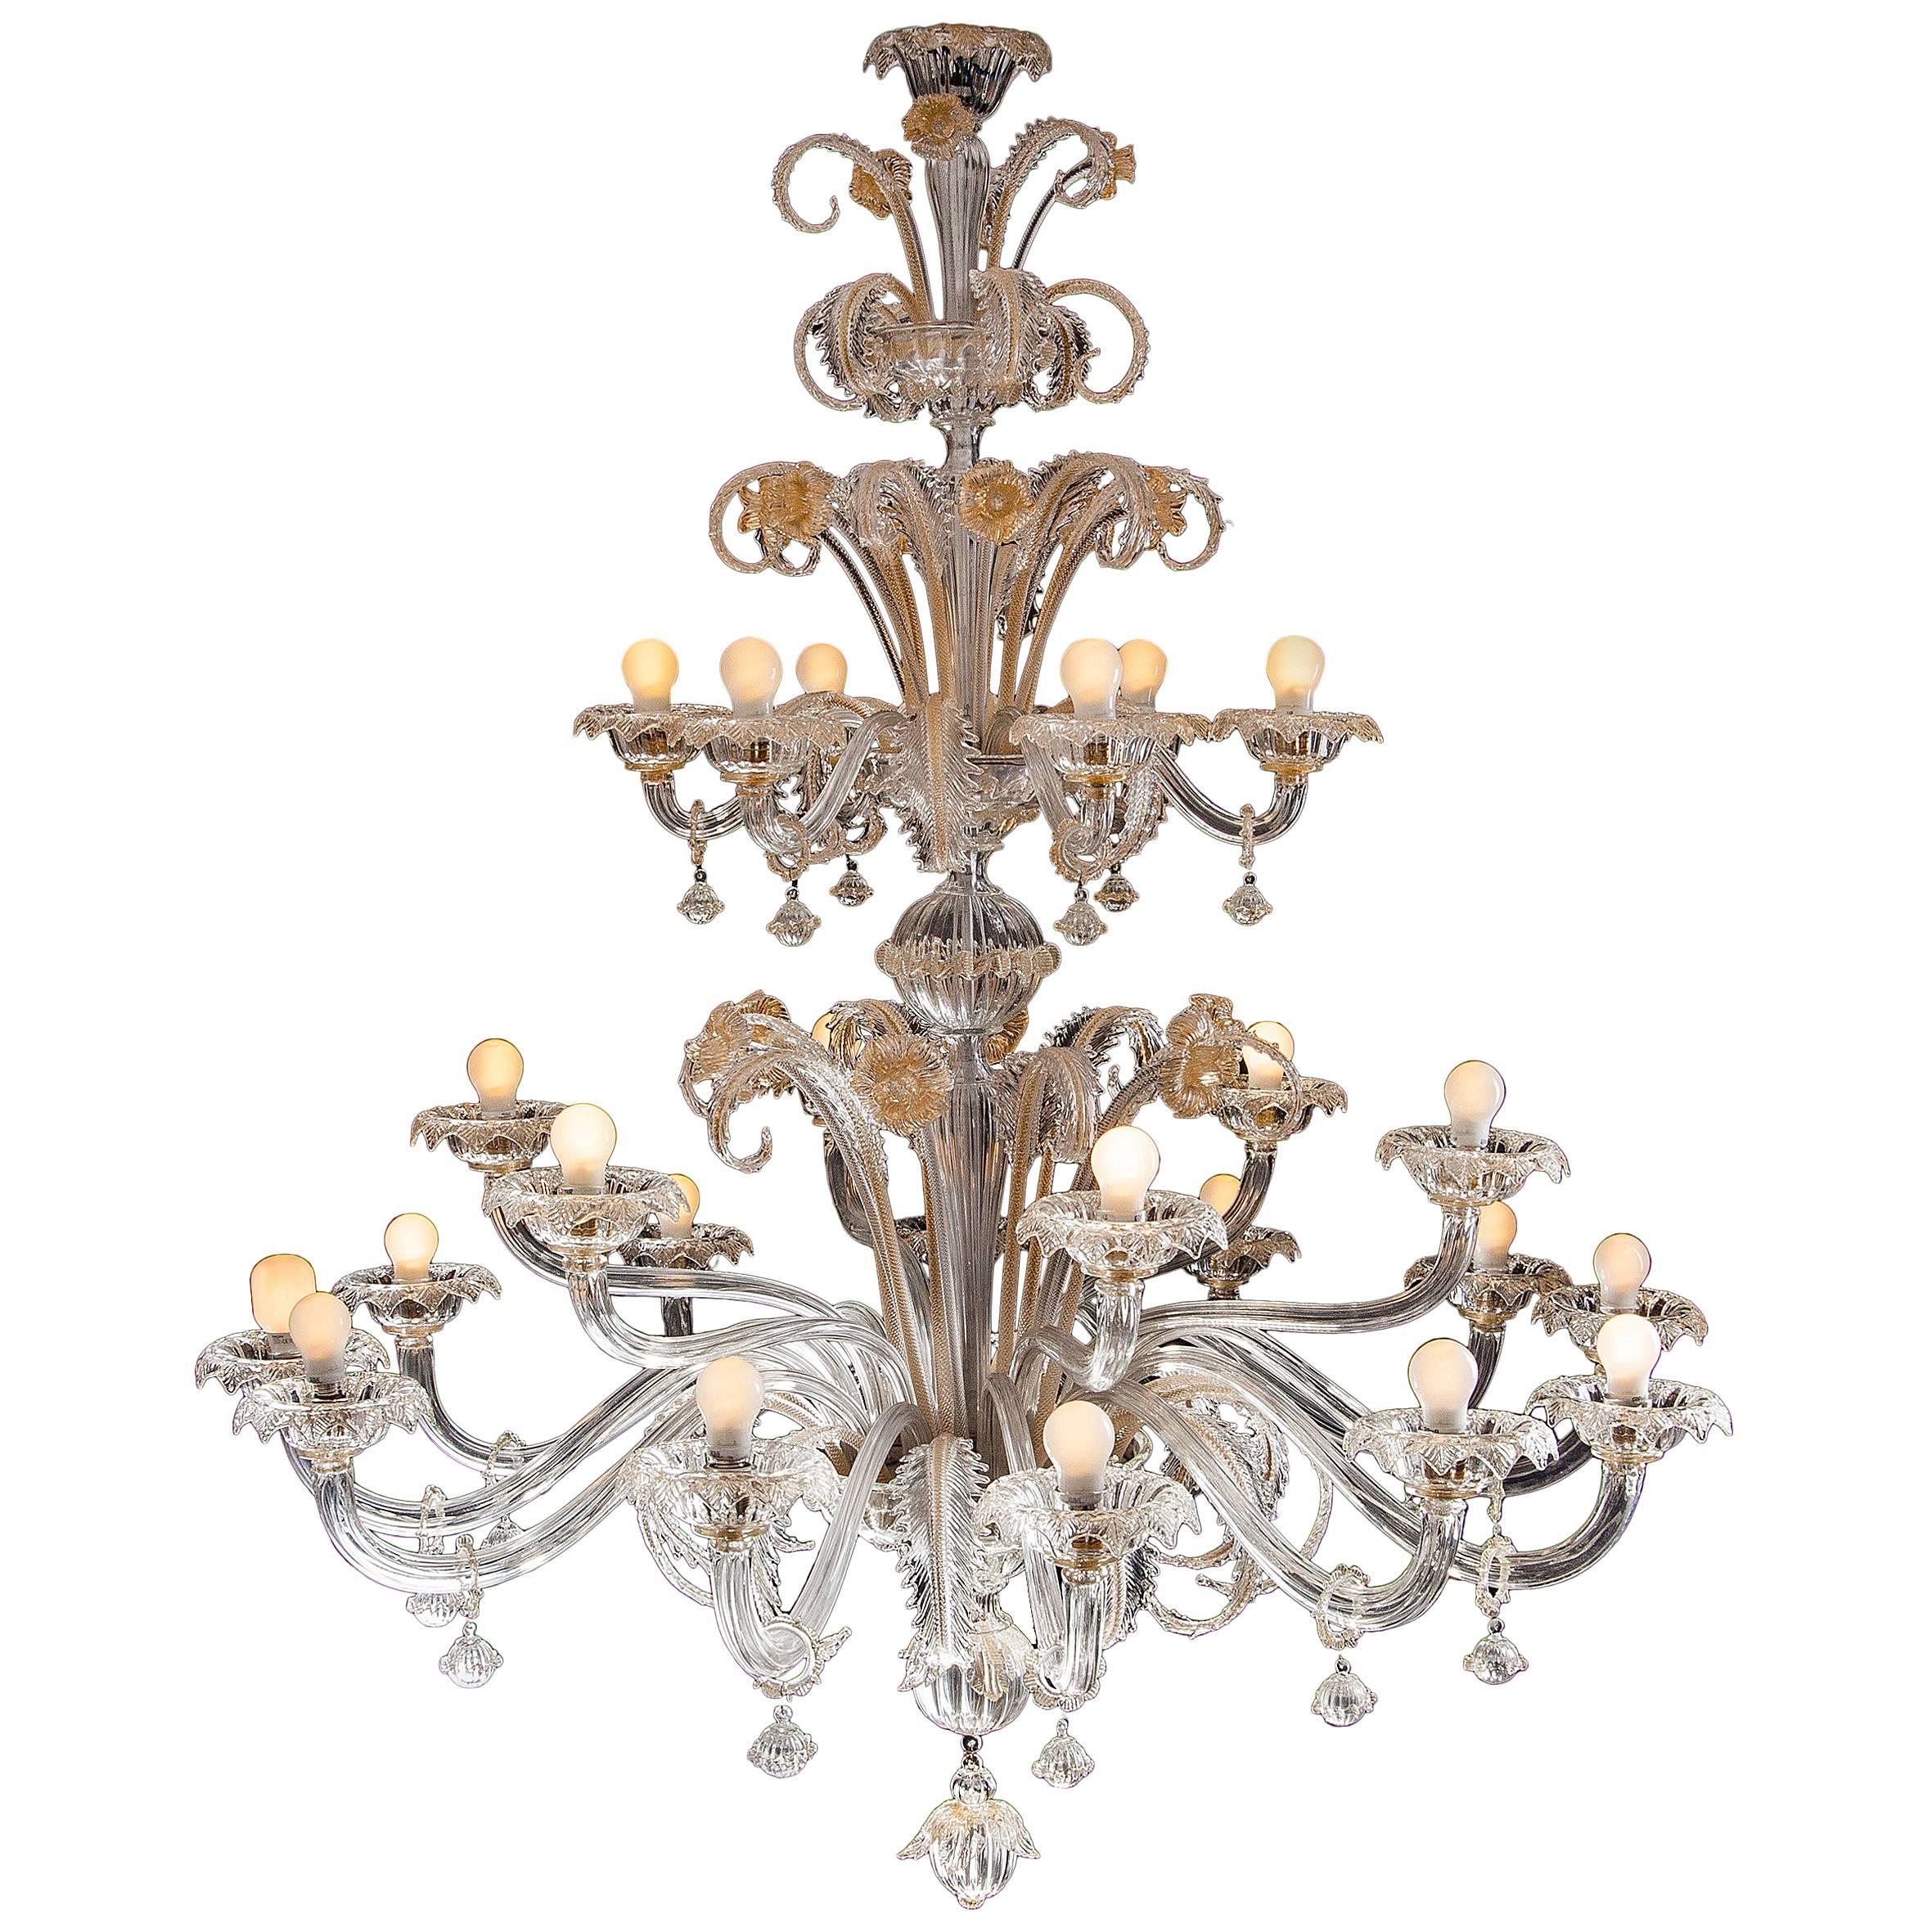 Spectacular pair of Murano chandeliers. The arms 24 are arranged on three floors. The glasses are embellished with gold inclusions.
 Provenance from an important Roman palace.